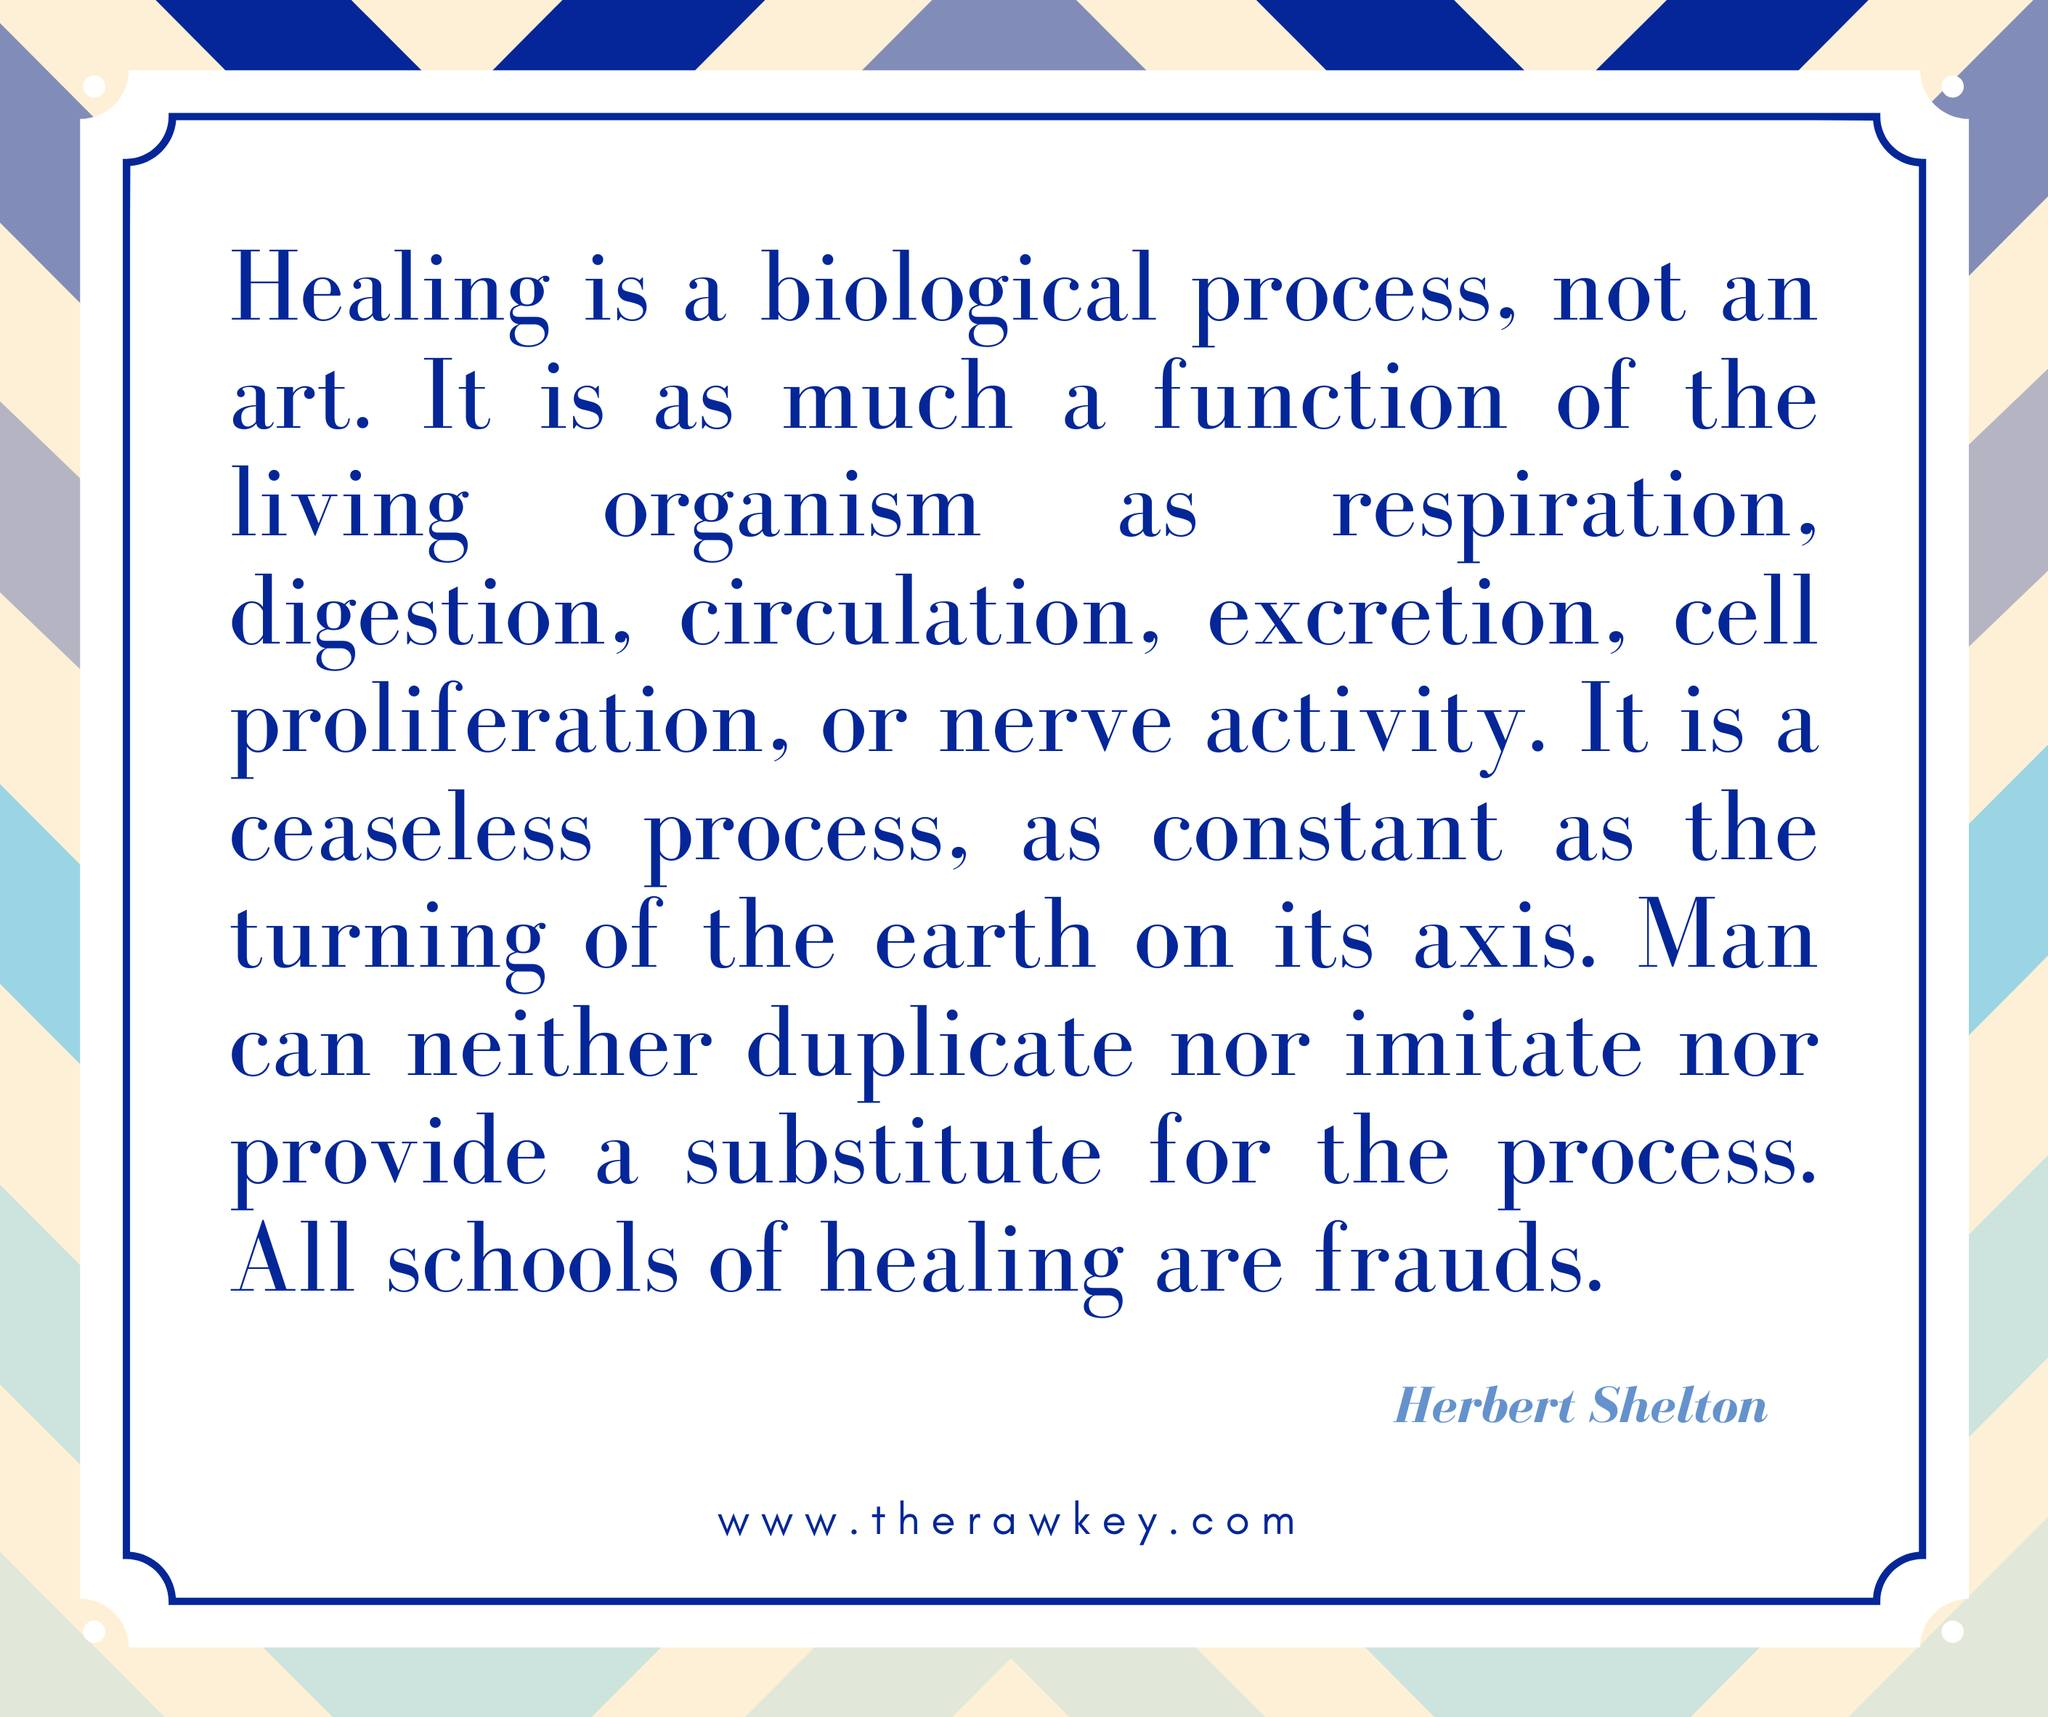 Quote:  "Healing is a biological process, not an art. It is as much a function of the living organism as respiration, digestion, circulation, excretion, cell proliferation, or nerve activity.  It is a ceaseless process, as constant as the turning of earth on its axis,.  Man can neither duplicate nor imitate nor provide a substitute for the process.  All schools of healing are frauds."  Herbert Shelton